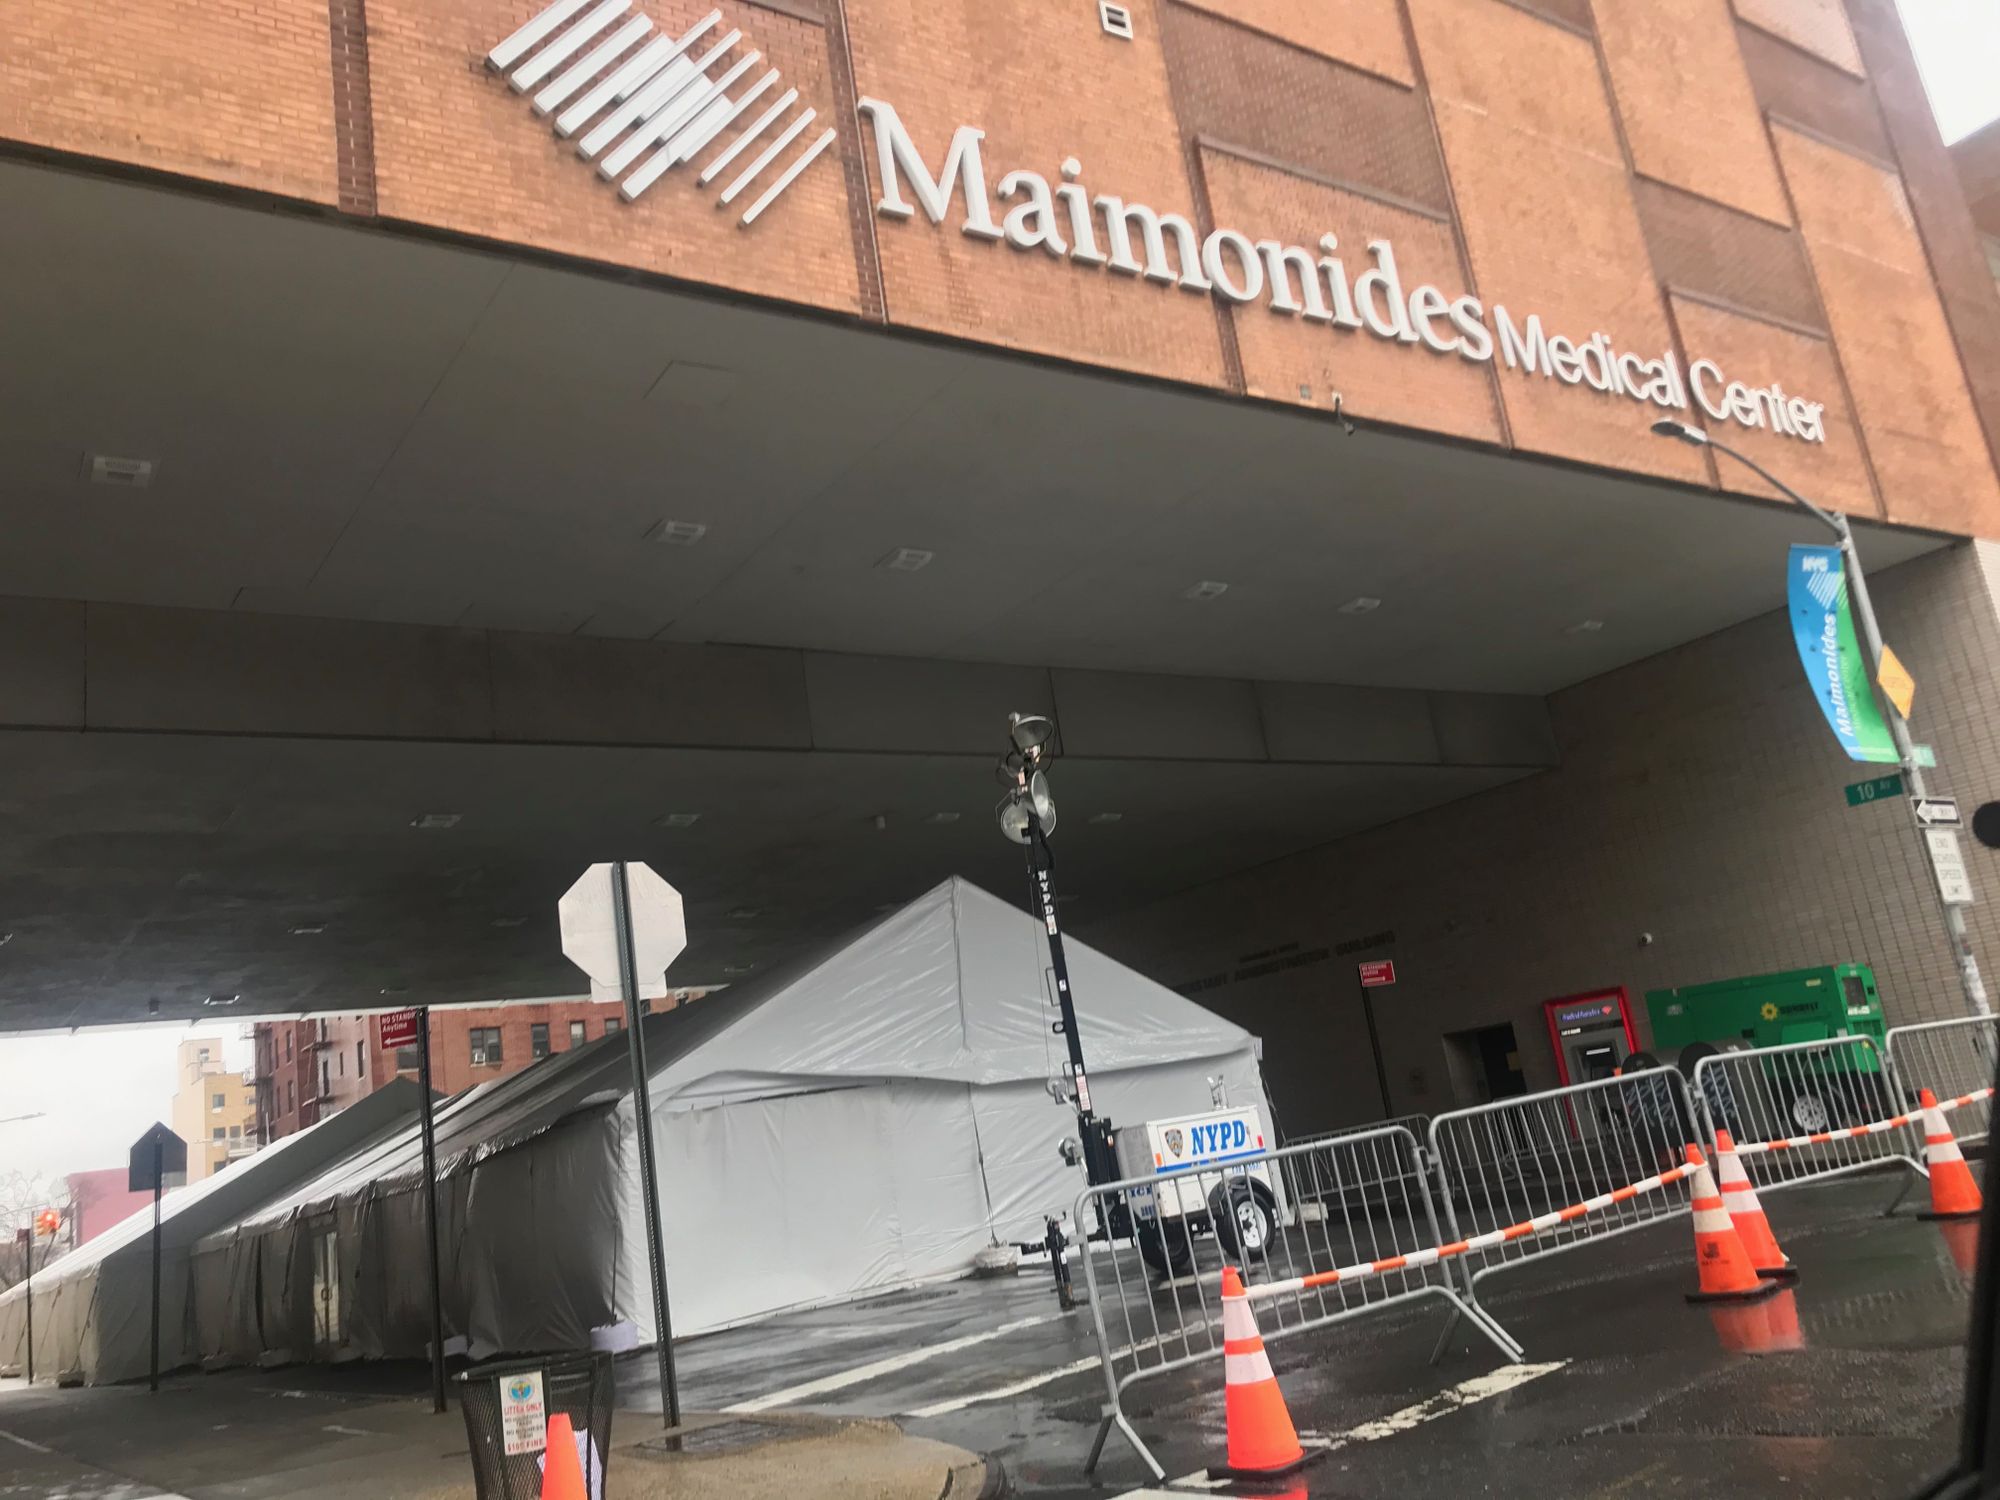 3/25 Briefing: Virtual Date From Rooftops, Quarantine Rainbow Connection, New MTA Schedule